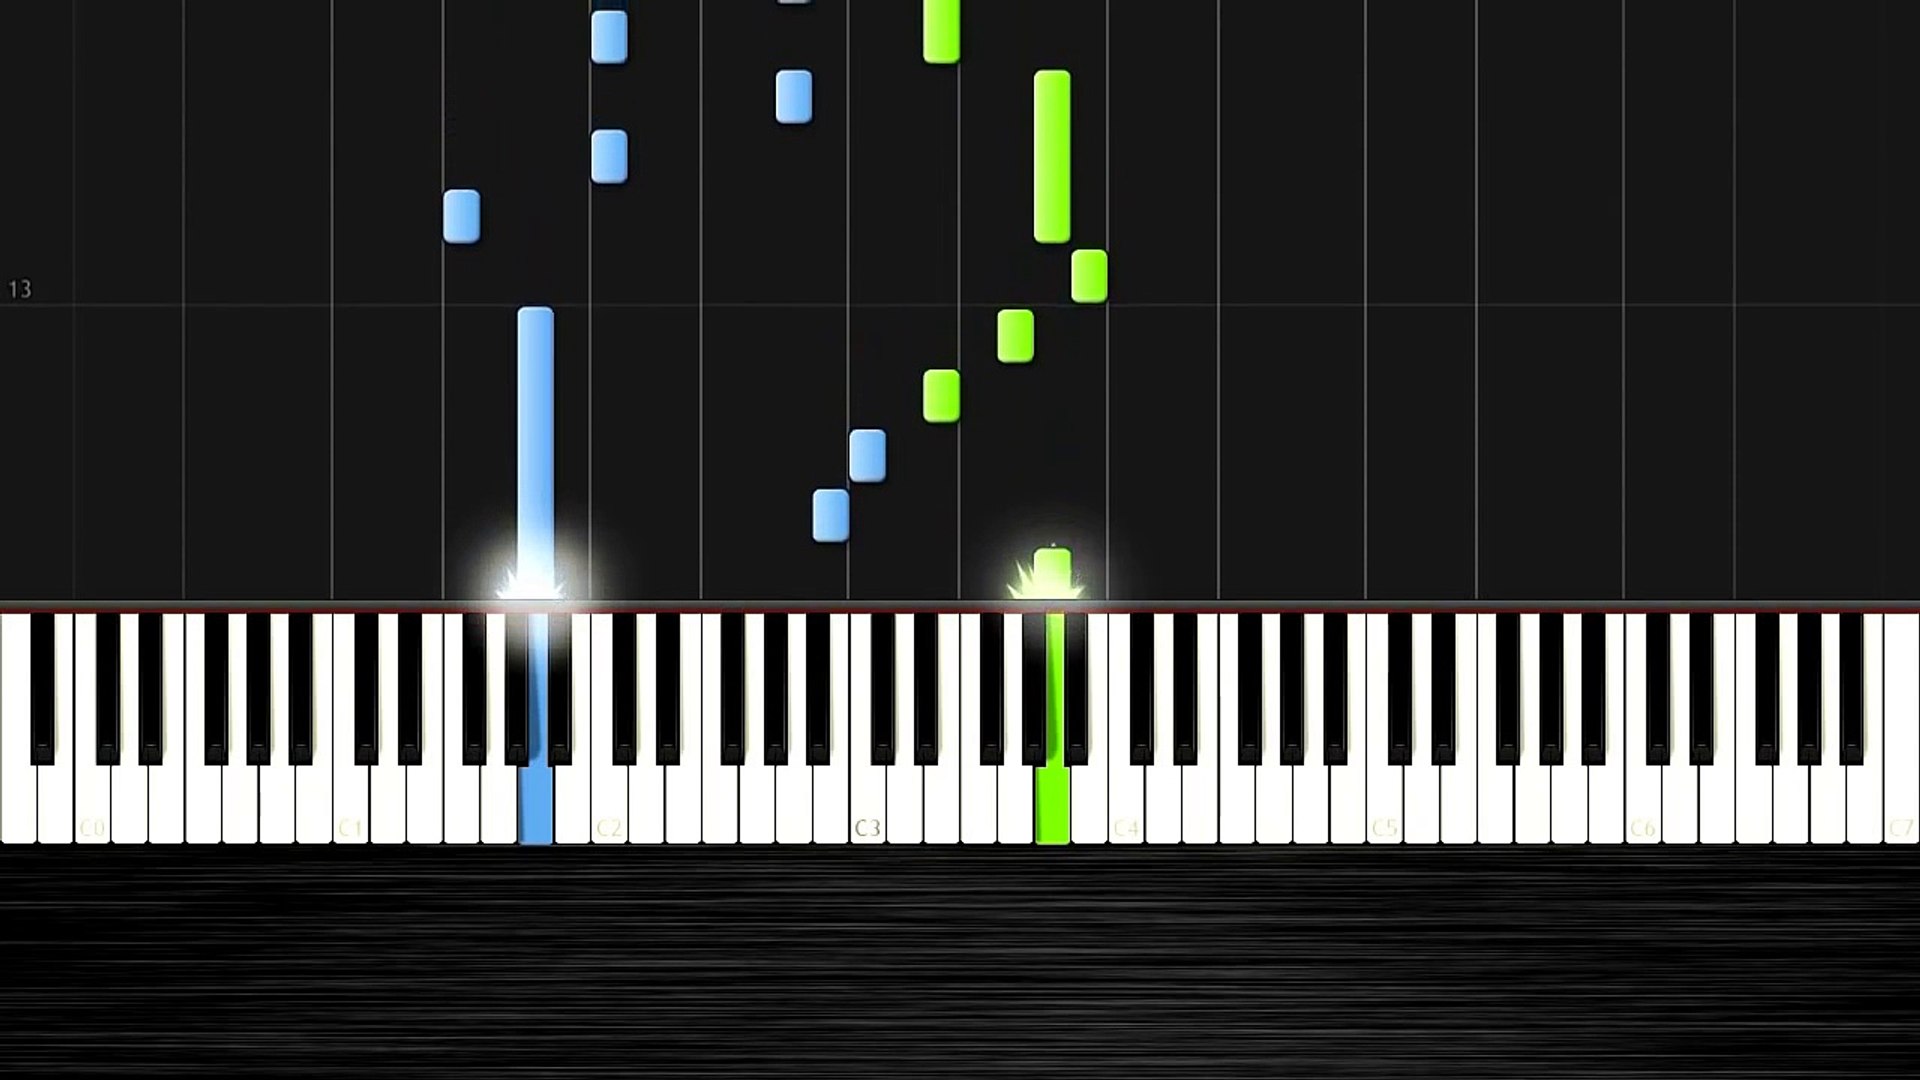 Ludovico Einaudi - Una Mattina (Intouchables) - Piano Tutorial by PlutaX -  Synthesia - Dailymotion Video